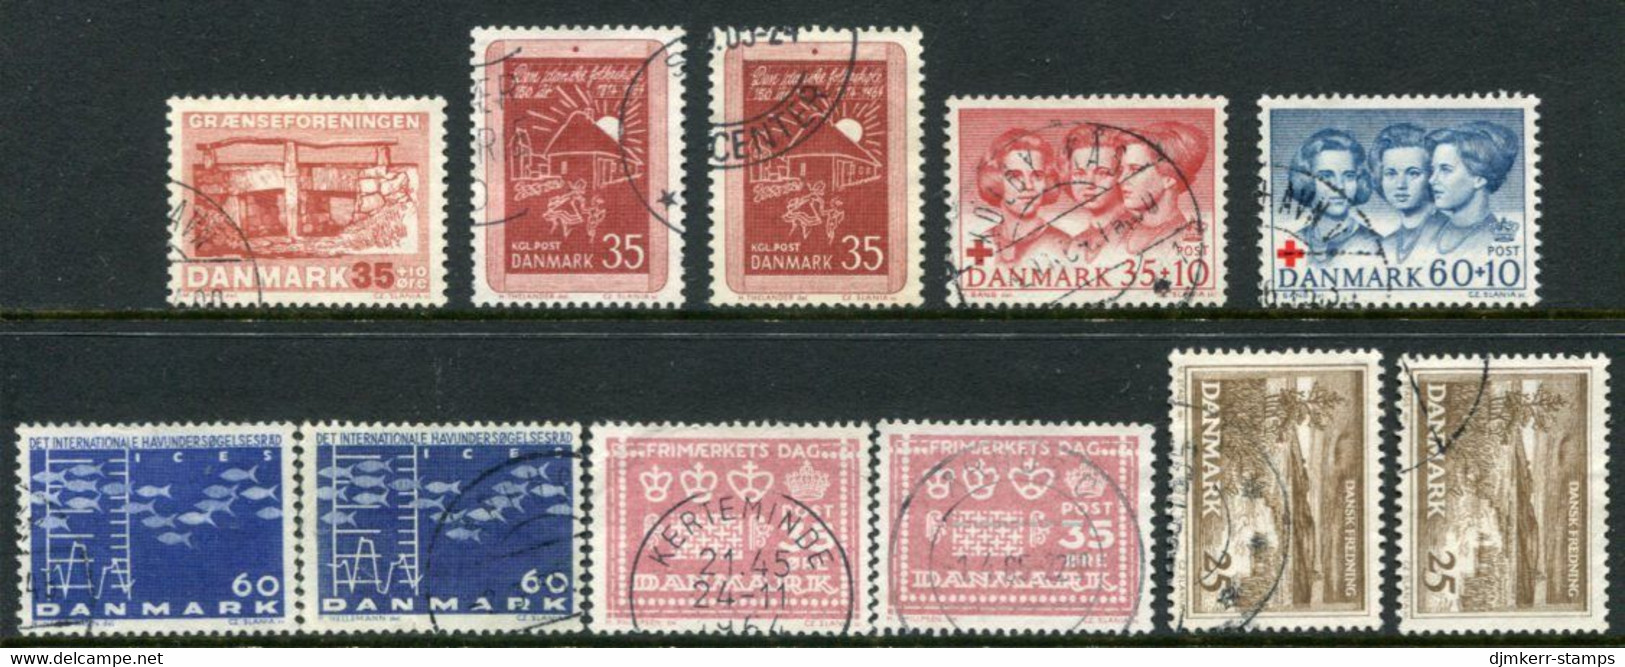 DENMARK 1964 Complete Issues With Ordinary And Fluorescent Papers, Used Michel 419-425y - Usado